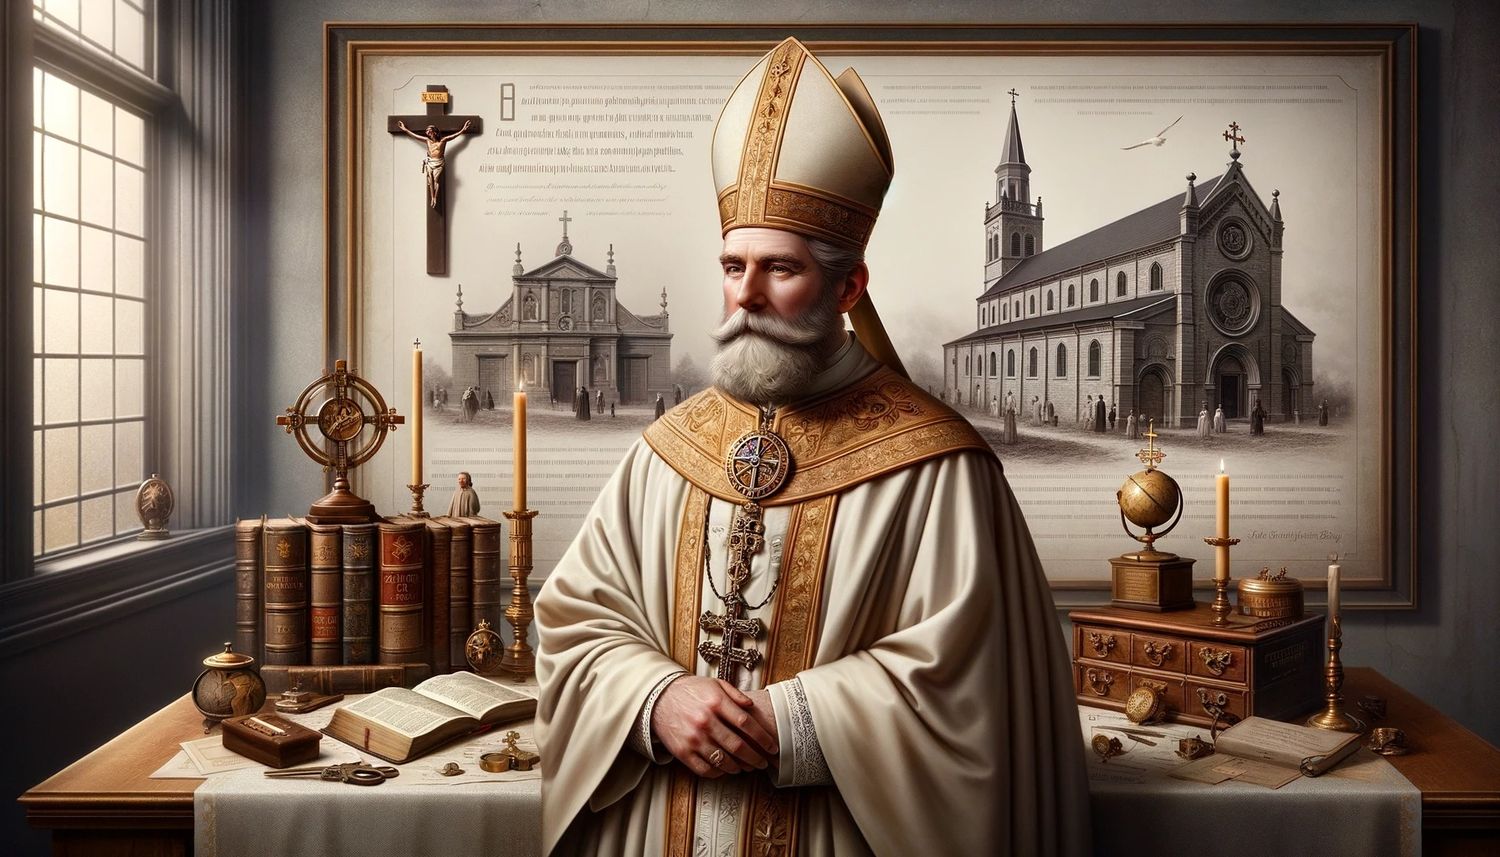 Which Colony Was The Center Of Catholicism?